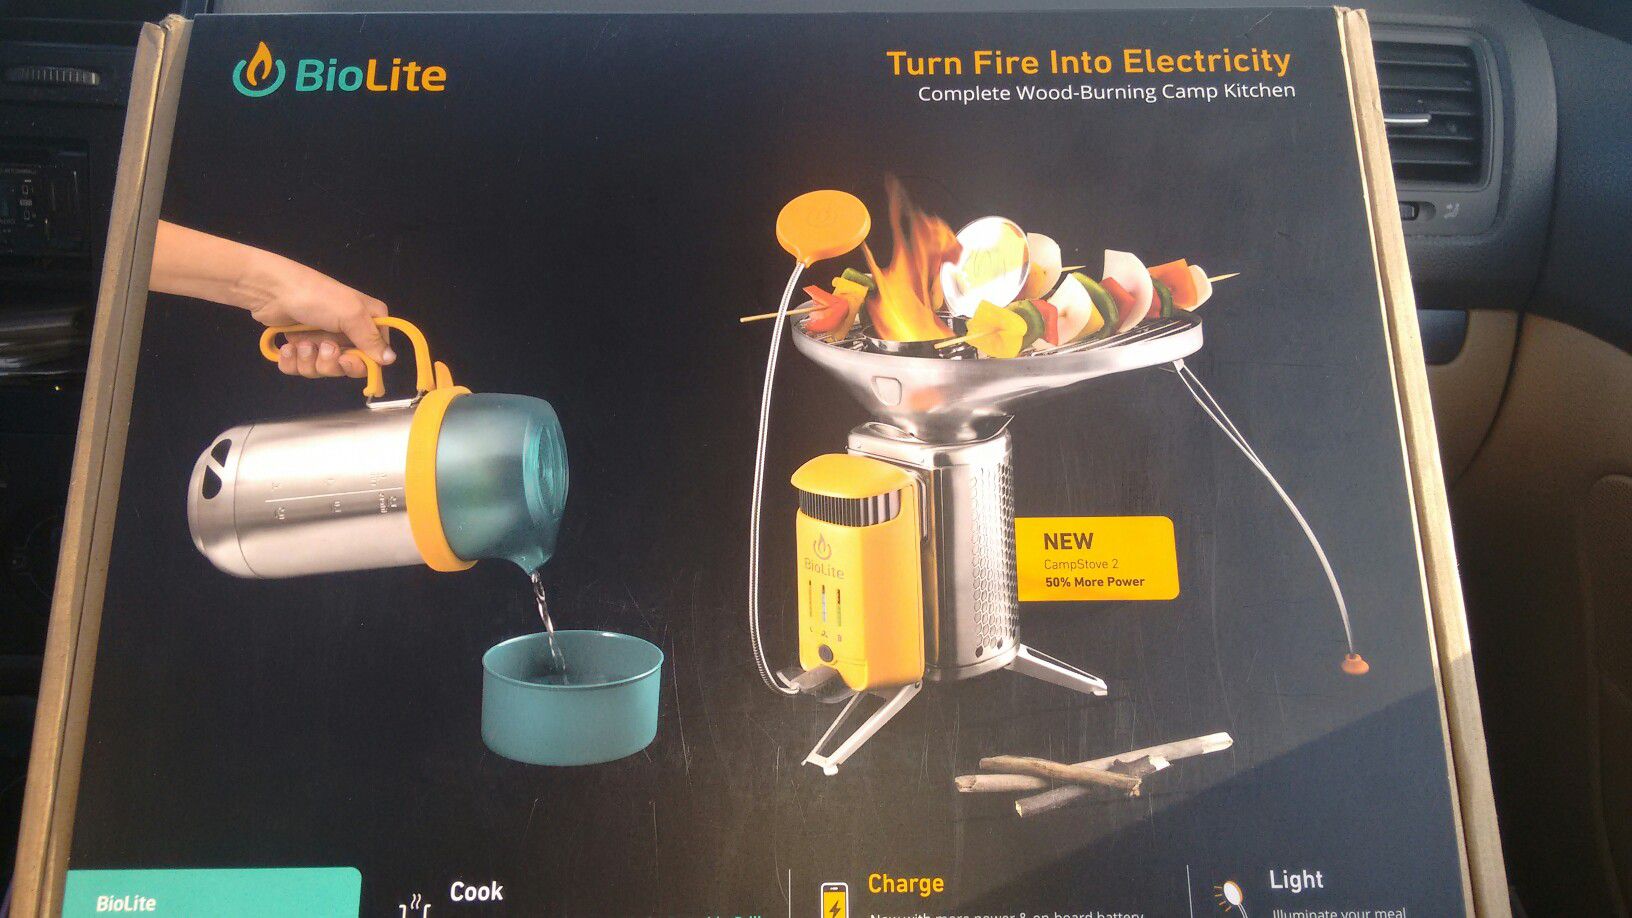 Bio lite portable campstove, creates and stores energy\ while cooking